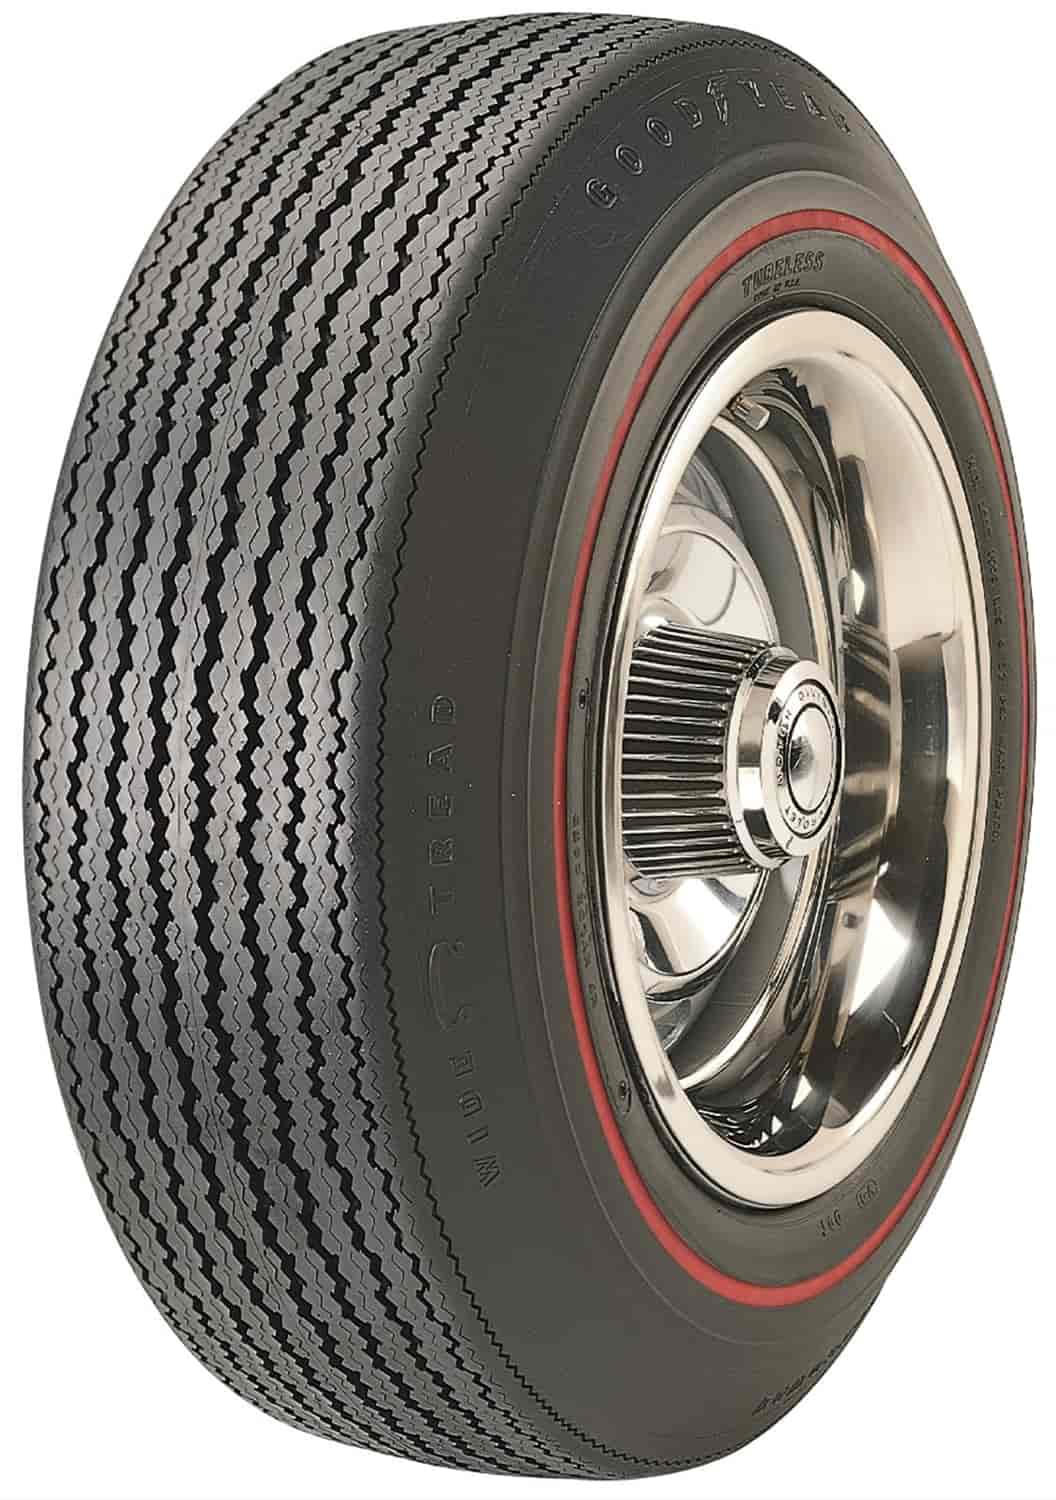 Goodyear Collector Series Speedway Wide Tread Tire